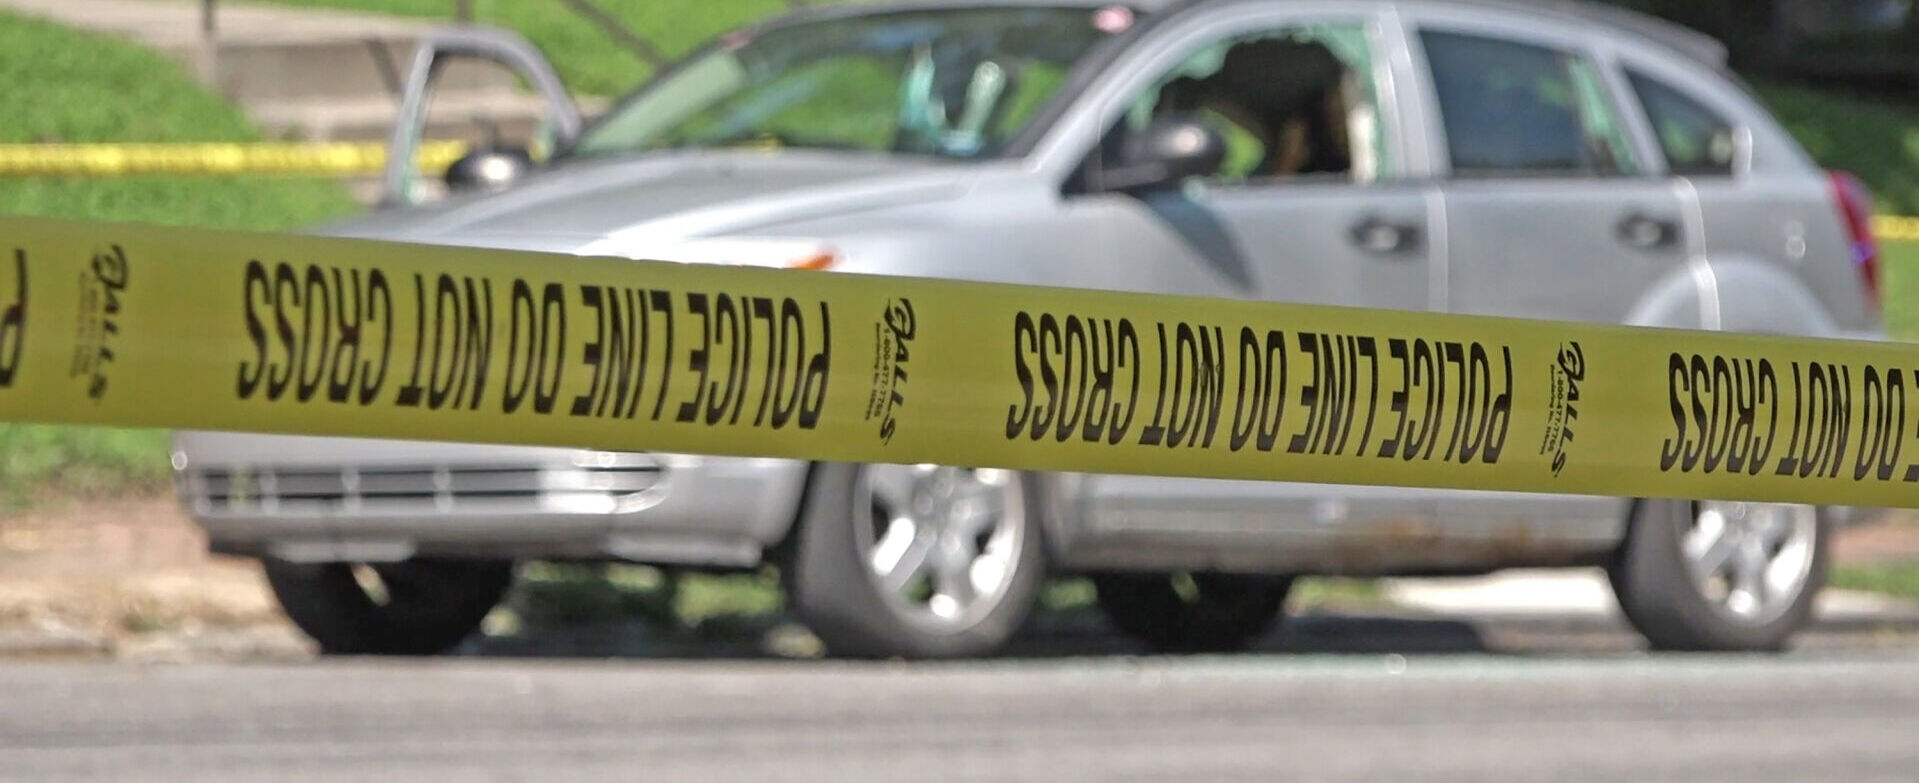 Could more be done to combat gun crime in St. Joseph?